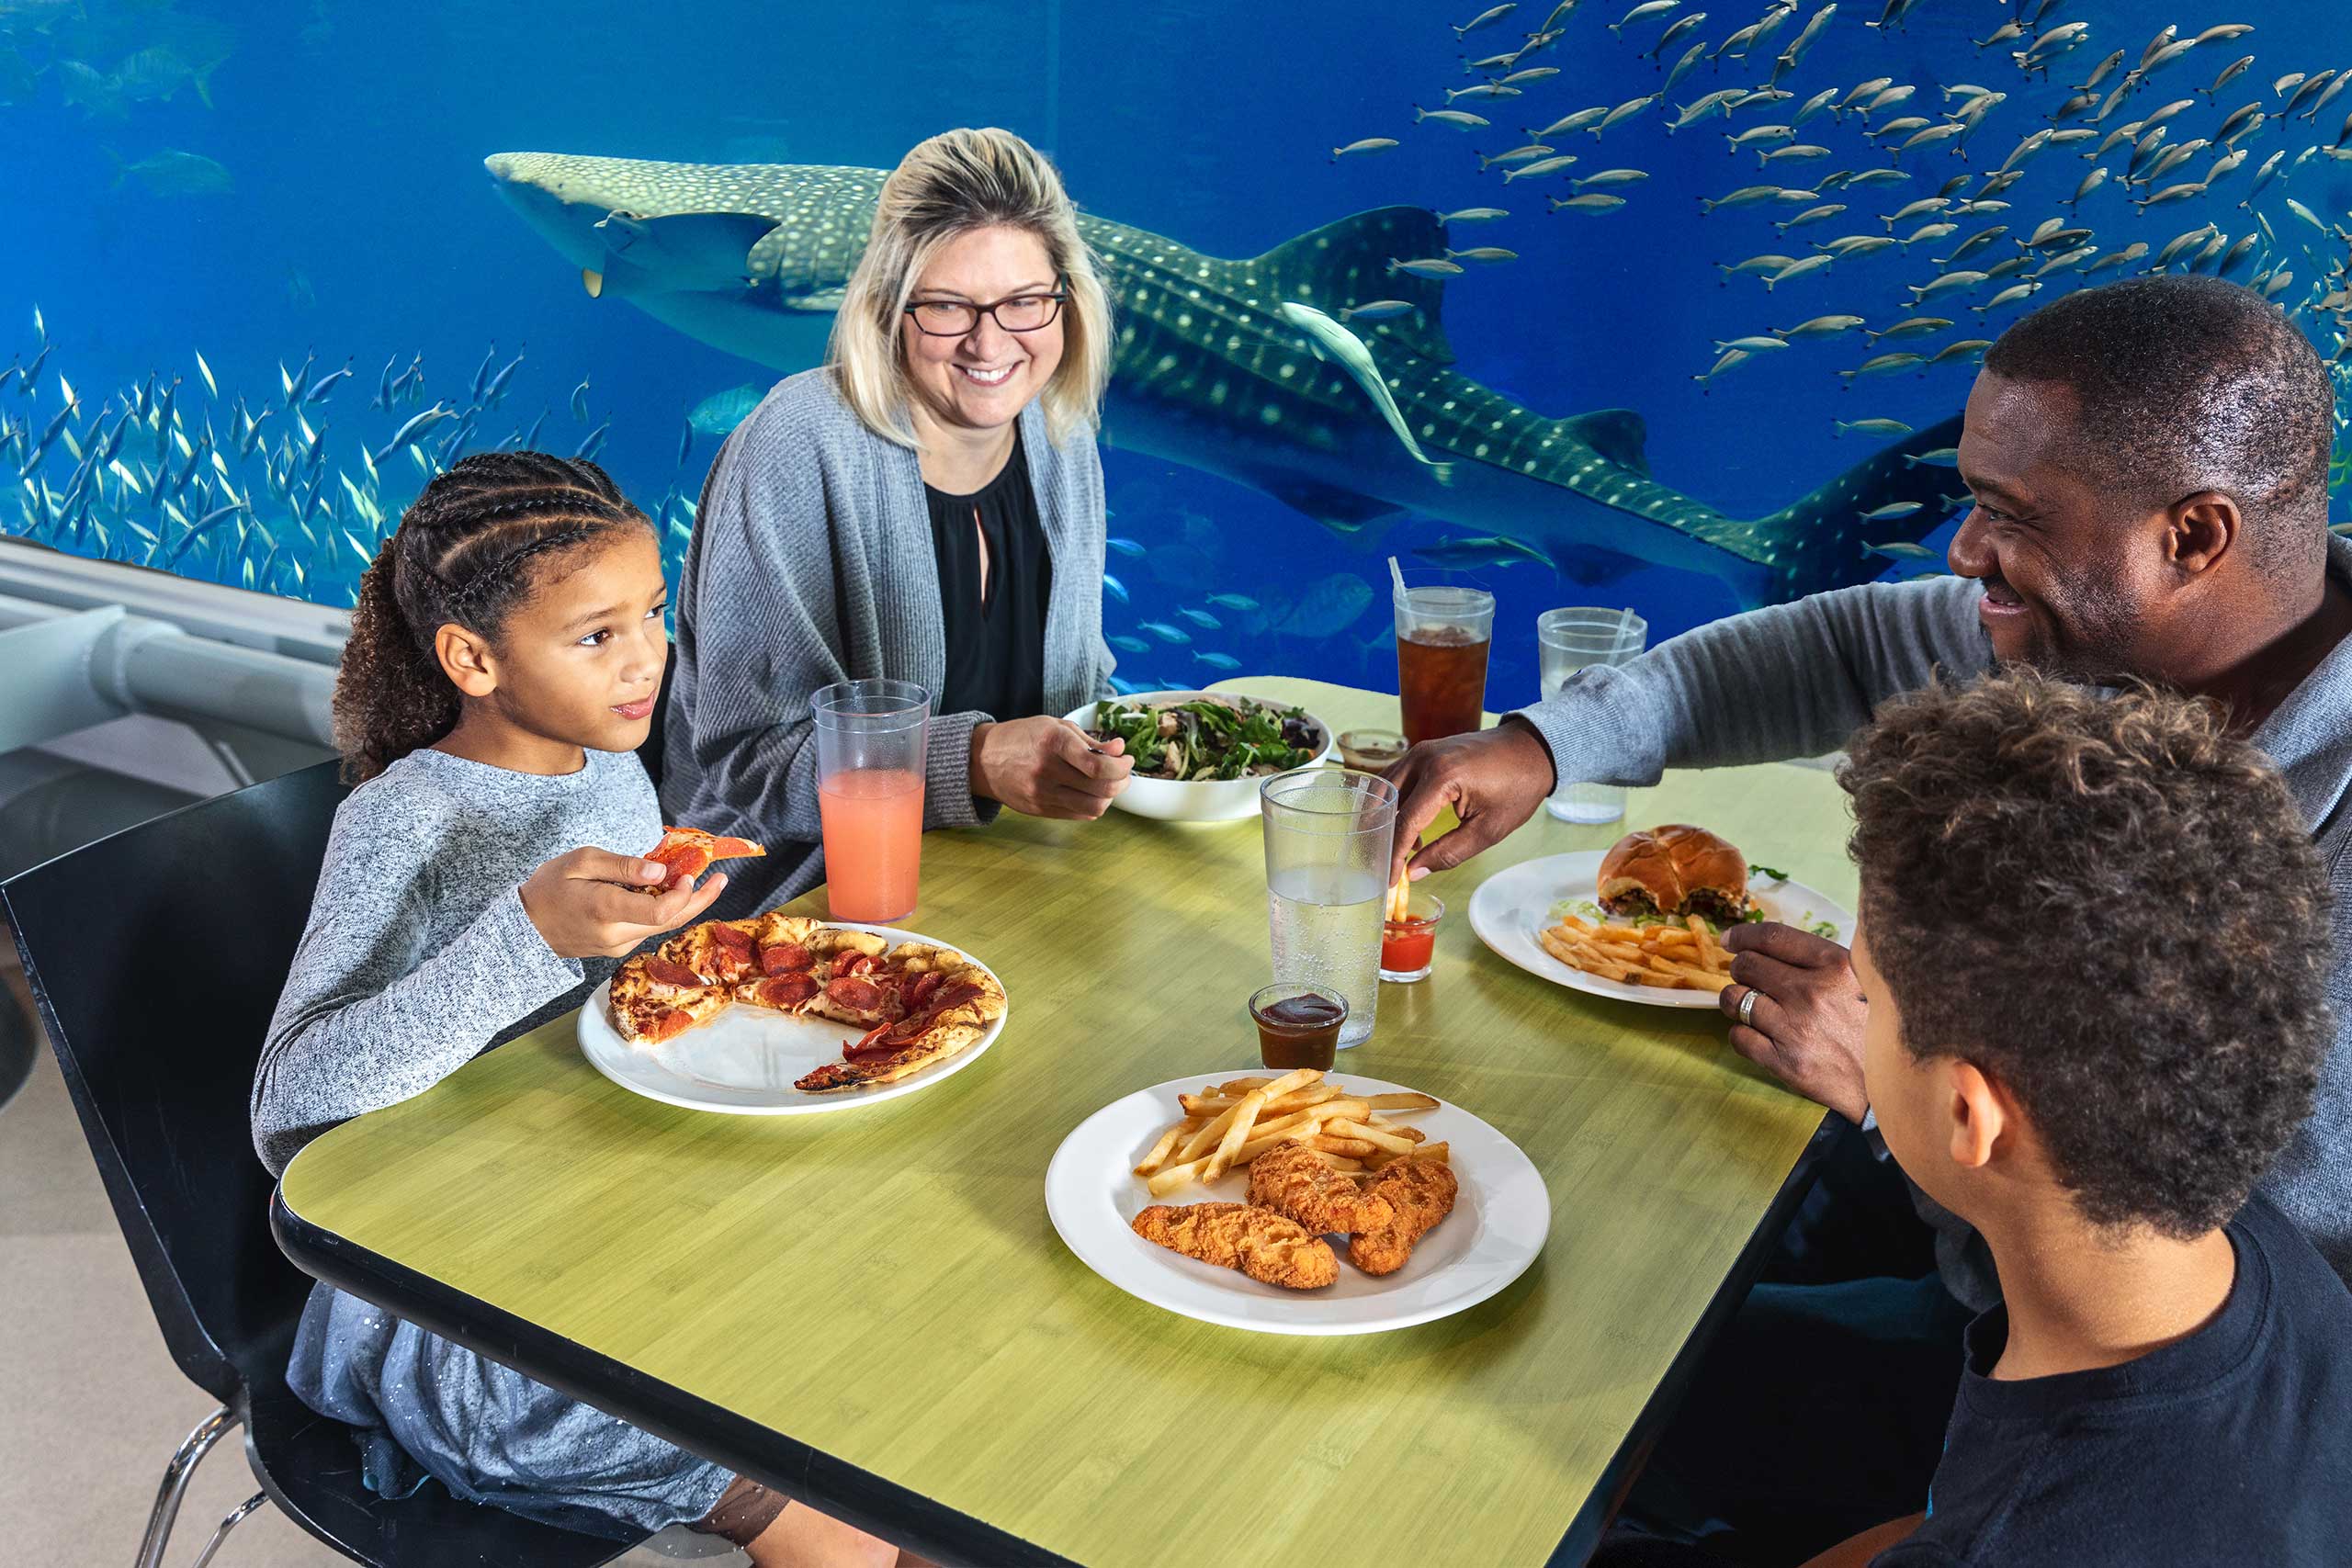 Family eating lunch in front of aquarium at museum